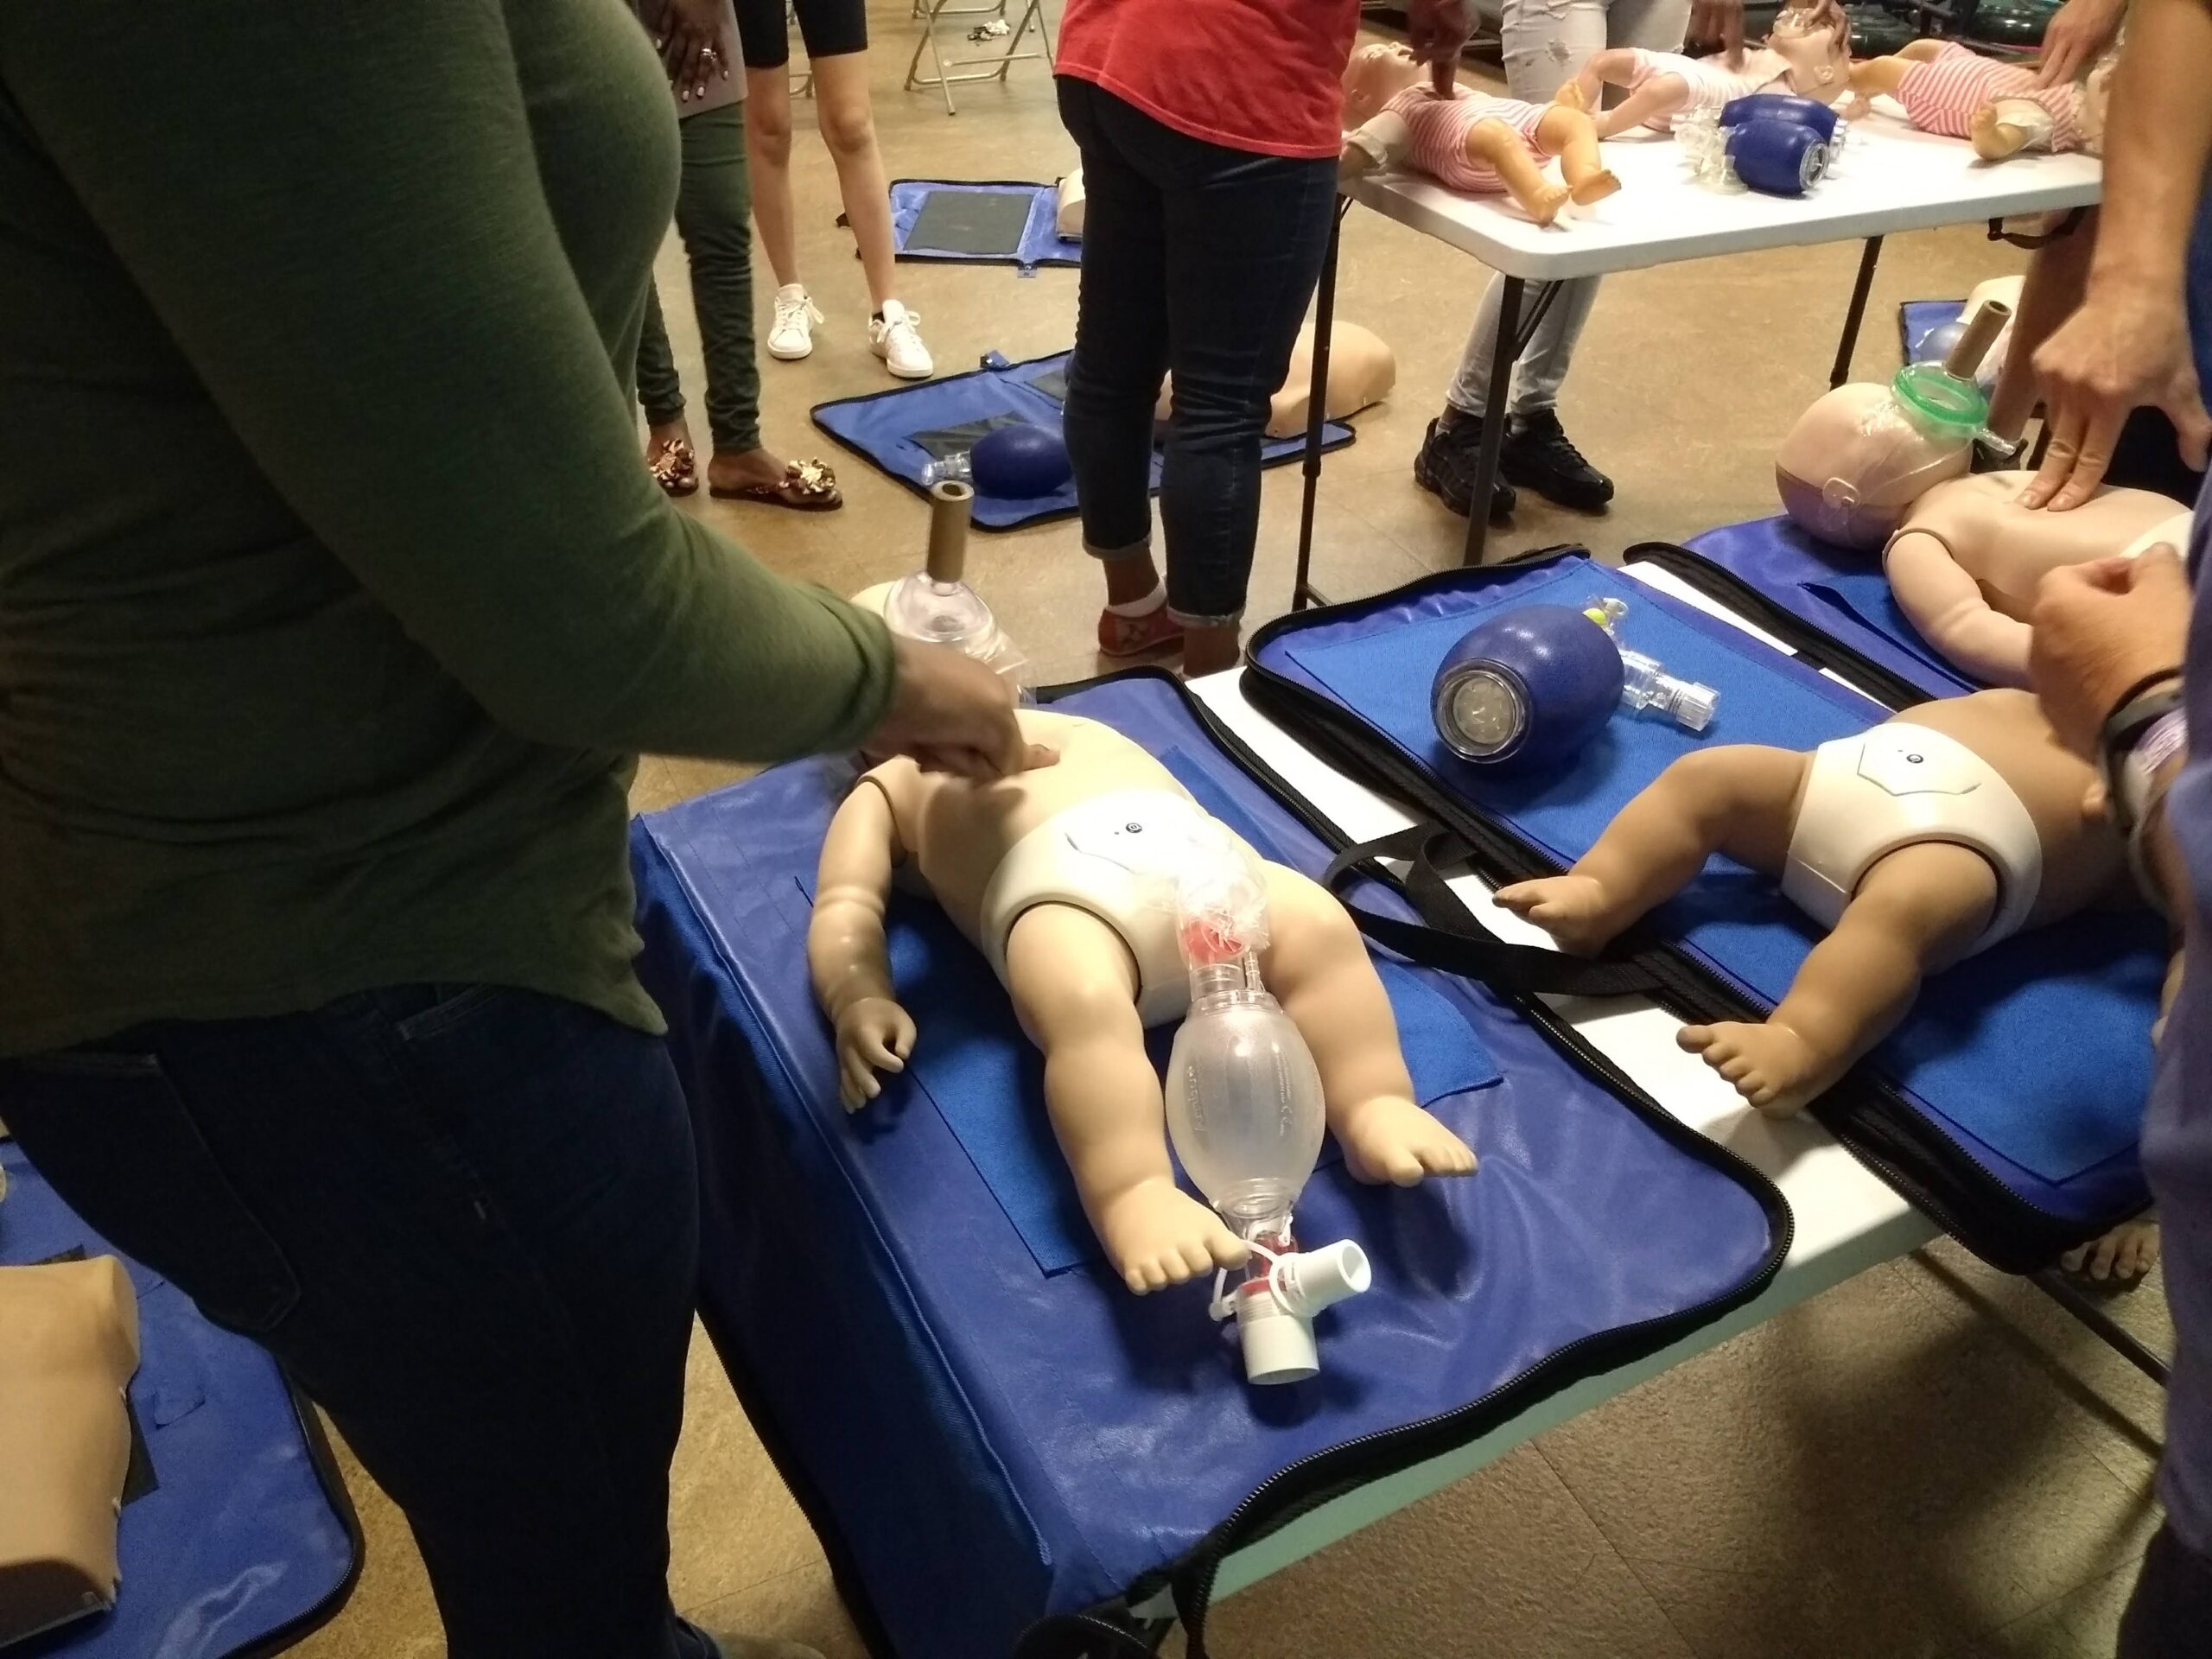 "Life-Saving CPR Certification Classes by Pulse CPR - Enroll Now!"